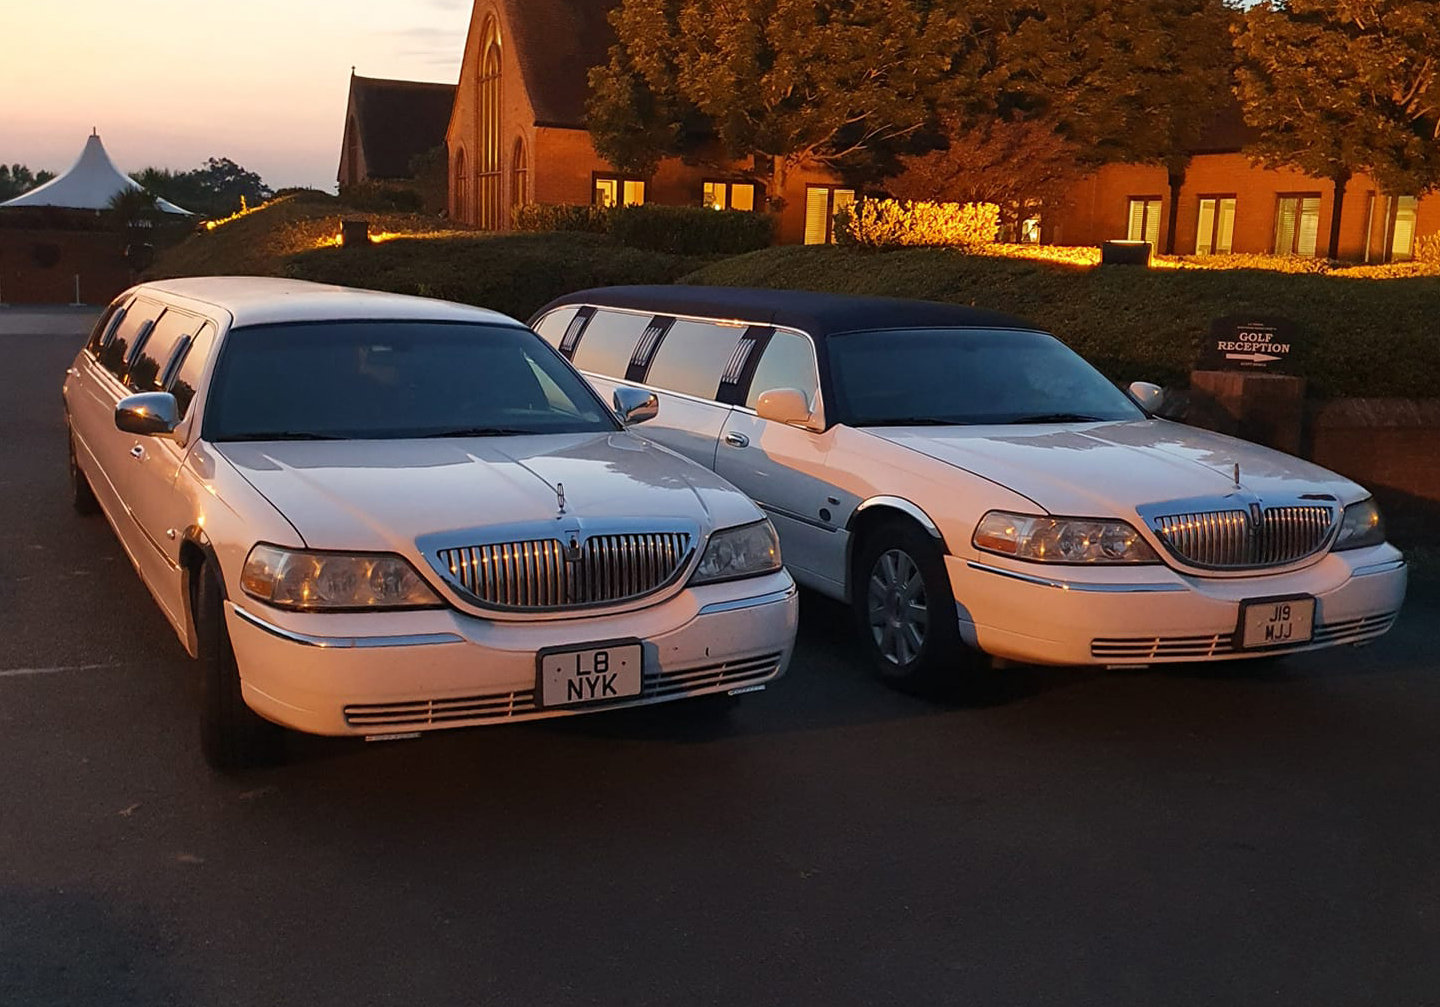 two white, stretched limousines parked side by side at sunset